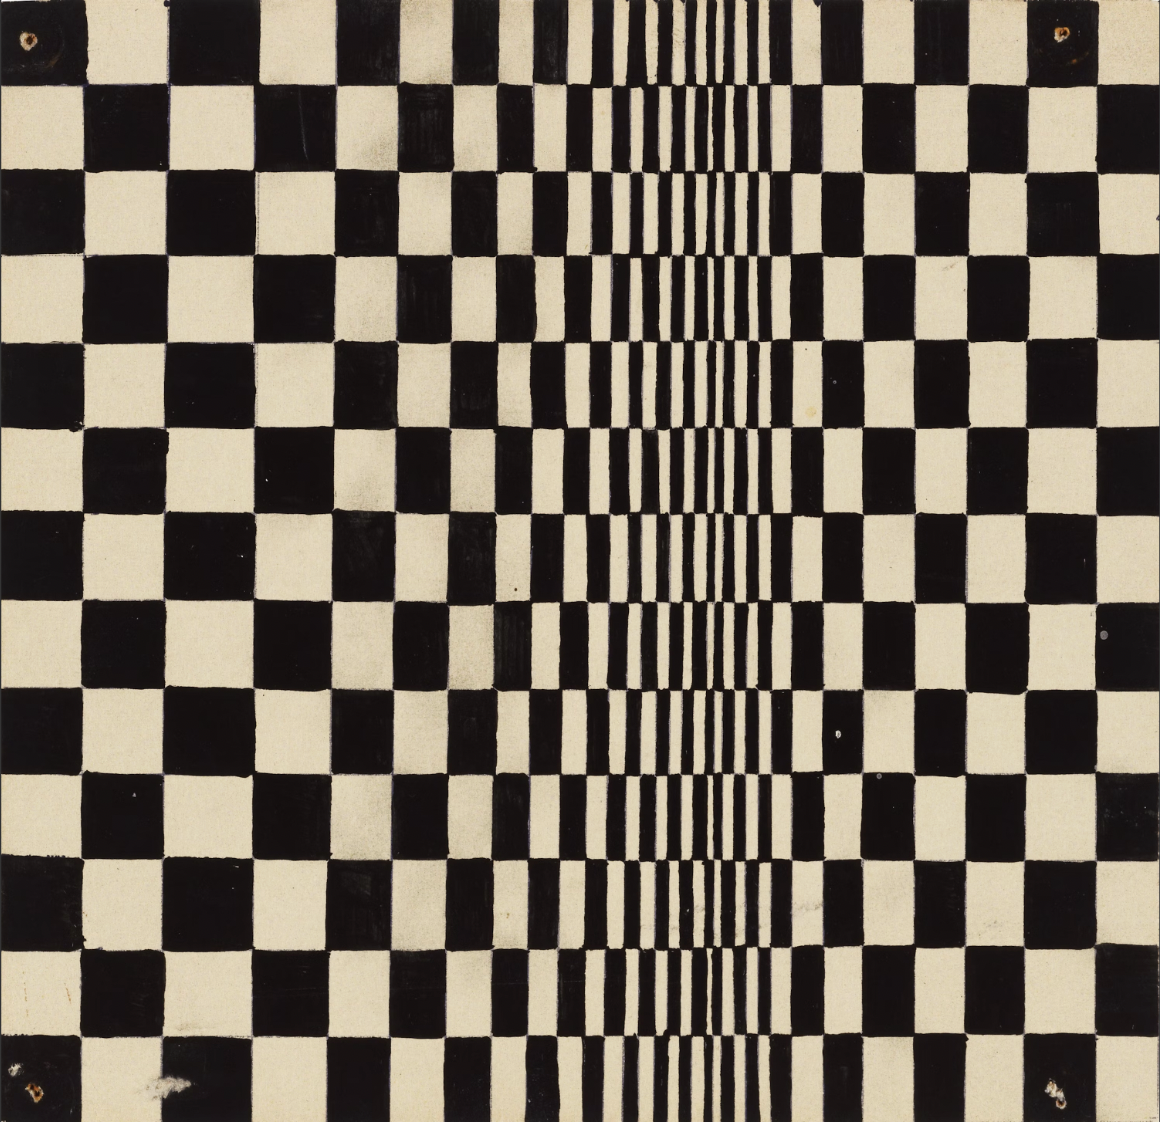 On a black-and-white checkered surface, the squares narrow to create an optical illusion of movement, as if the surface is contracting at approximately the golden ratio.